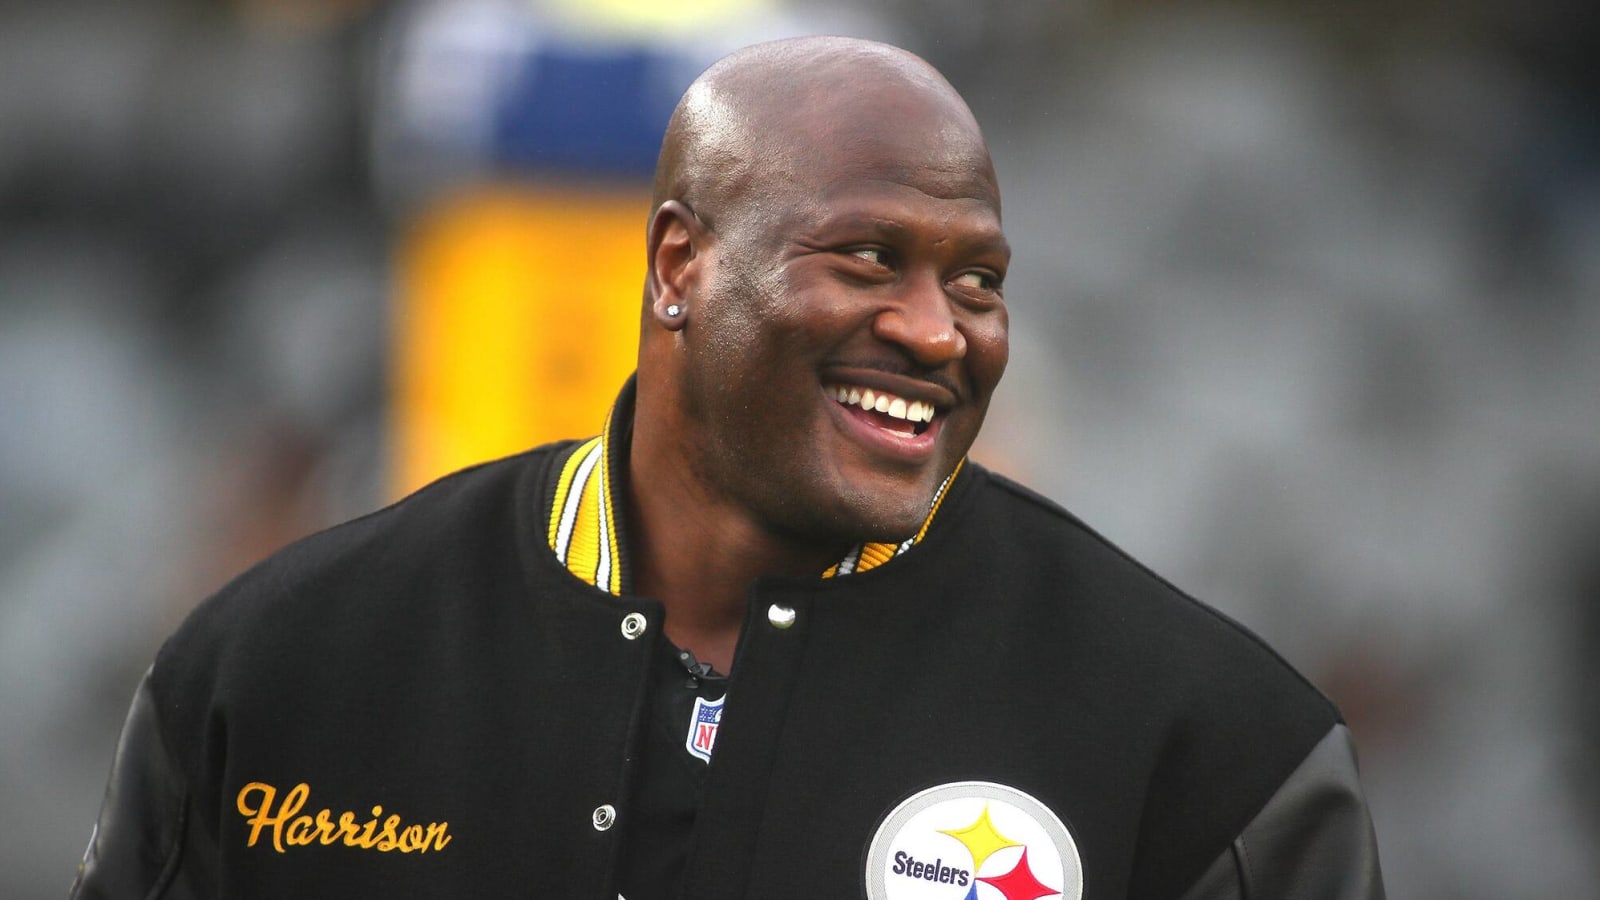 Steelers&#39; James Harrison Thankful For Monster College Performance Against Ben Roethlisberger: 'He Put Me On The Map' 